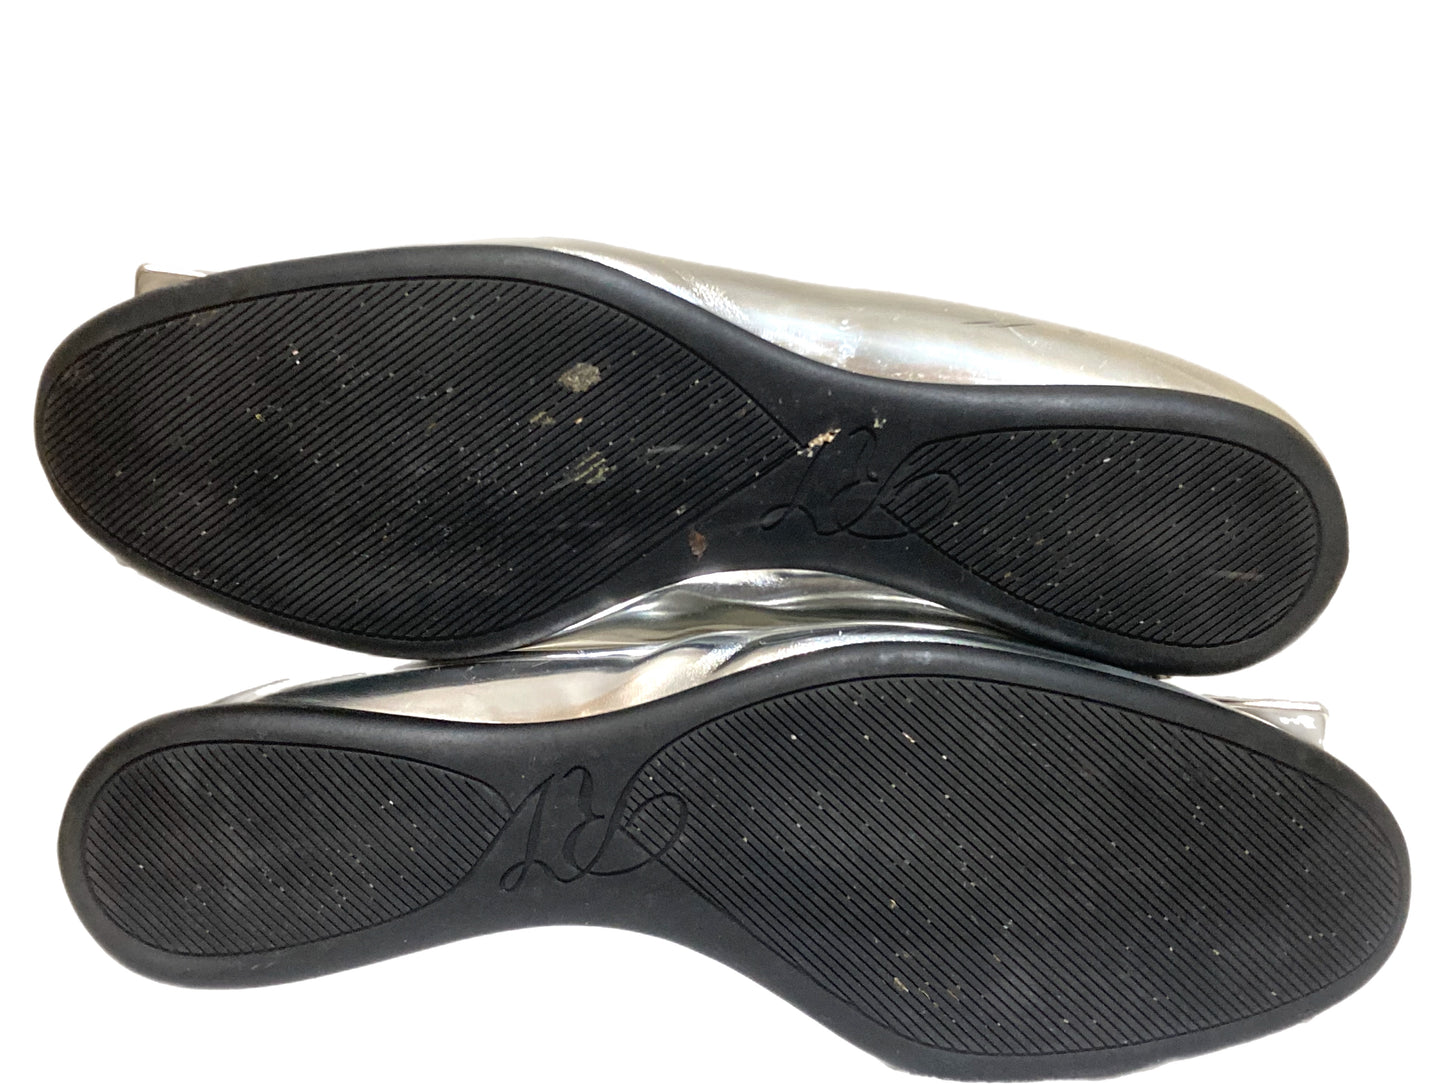 ROGER VIVIER Leather Metallic Flats Silver Size 39